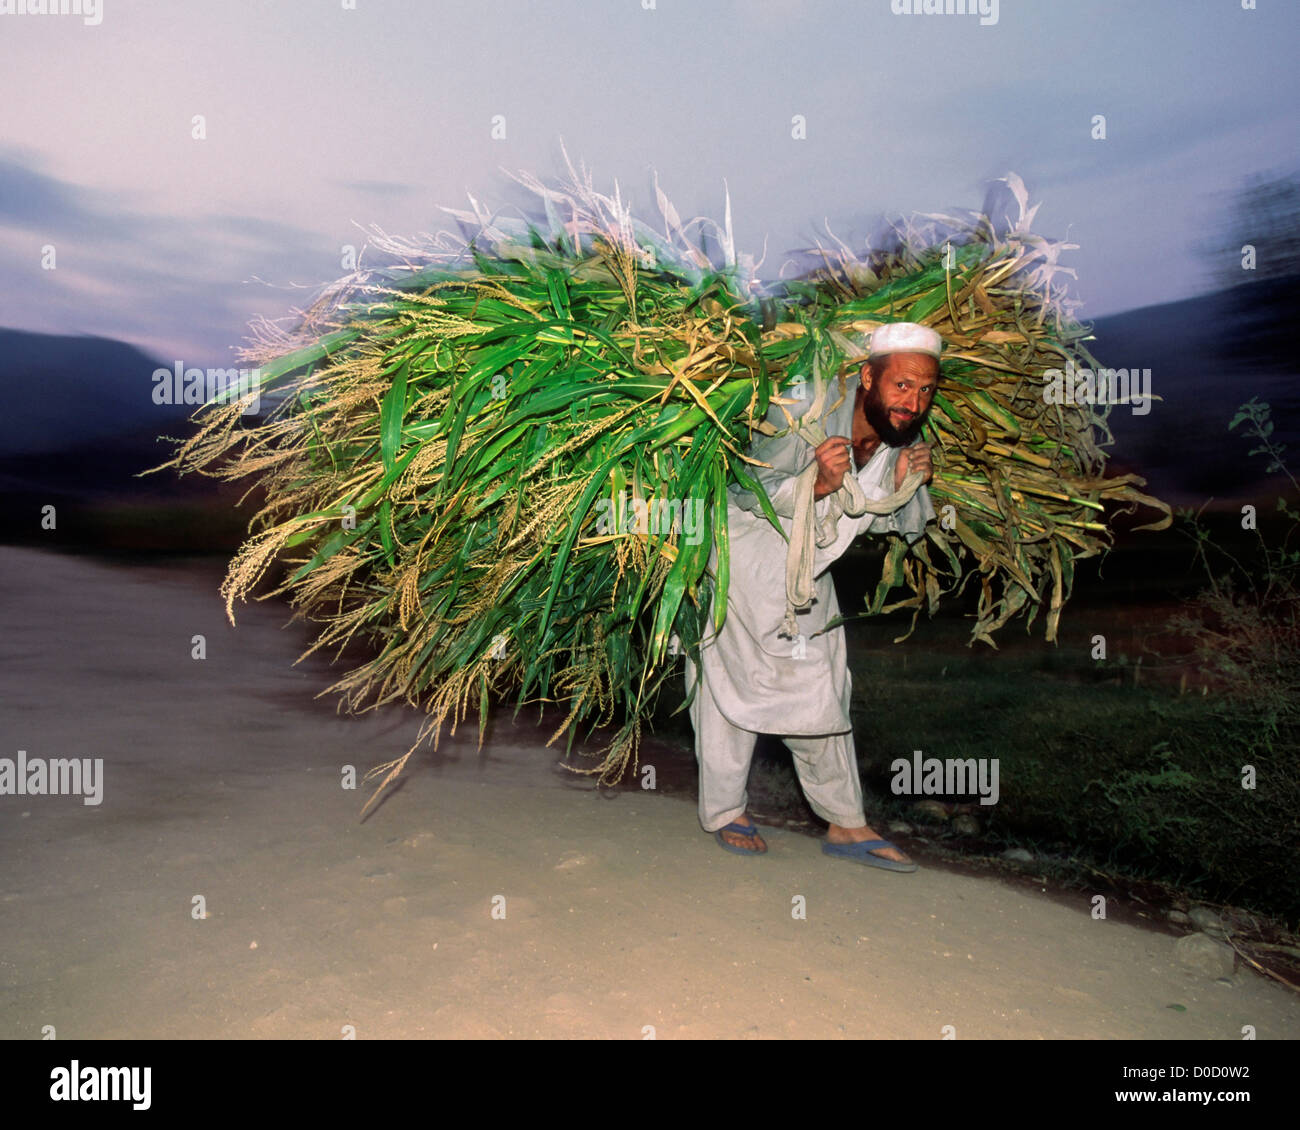 A Man Carries a Load of Corn Harvested in His Village of Watapor, Afghanistan Stock Photo